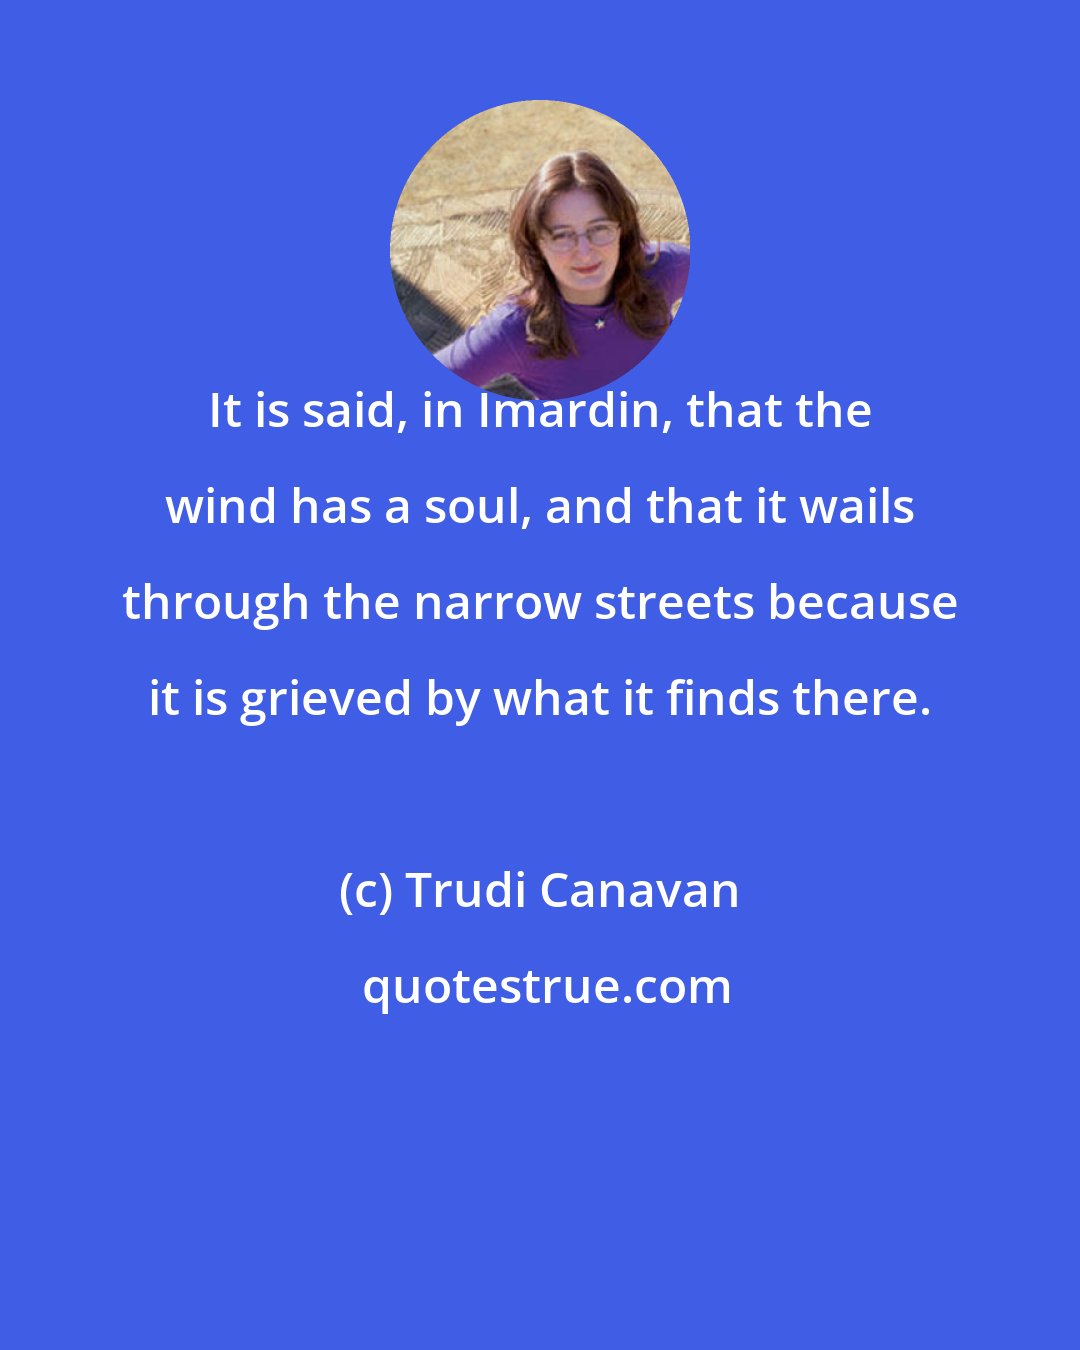 Trudi Canavan: It is said, in Imardin, that the wind has a soul, and that it wails through the narrow streets because it is grieved by what it finds there.